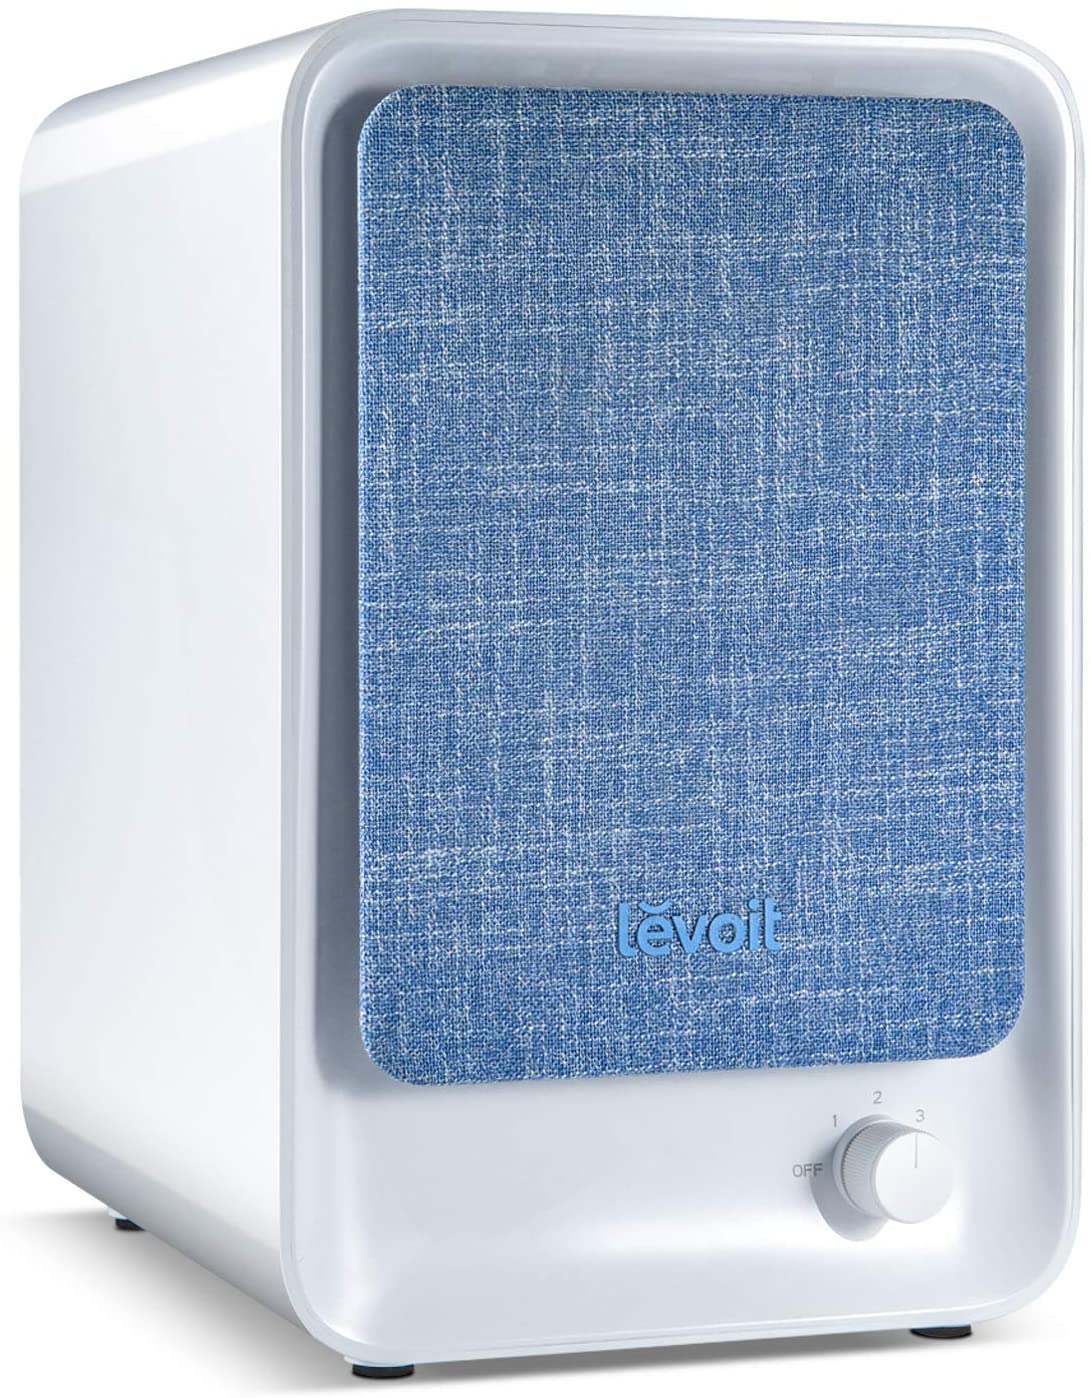 LEVOIT Air Purifier for Bedroom, HEPA Filter for Smoke in Home Office, Cleaner for Allergies and Pets Dander Dust Pollen, 100% Ozone Free, Odor Eliminator, LV-H126(Available for California)